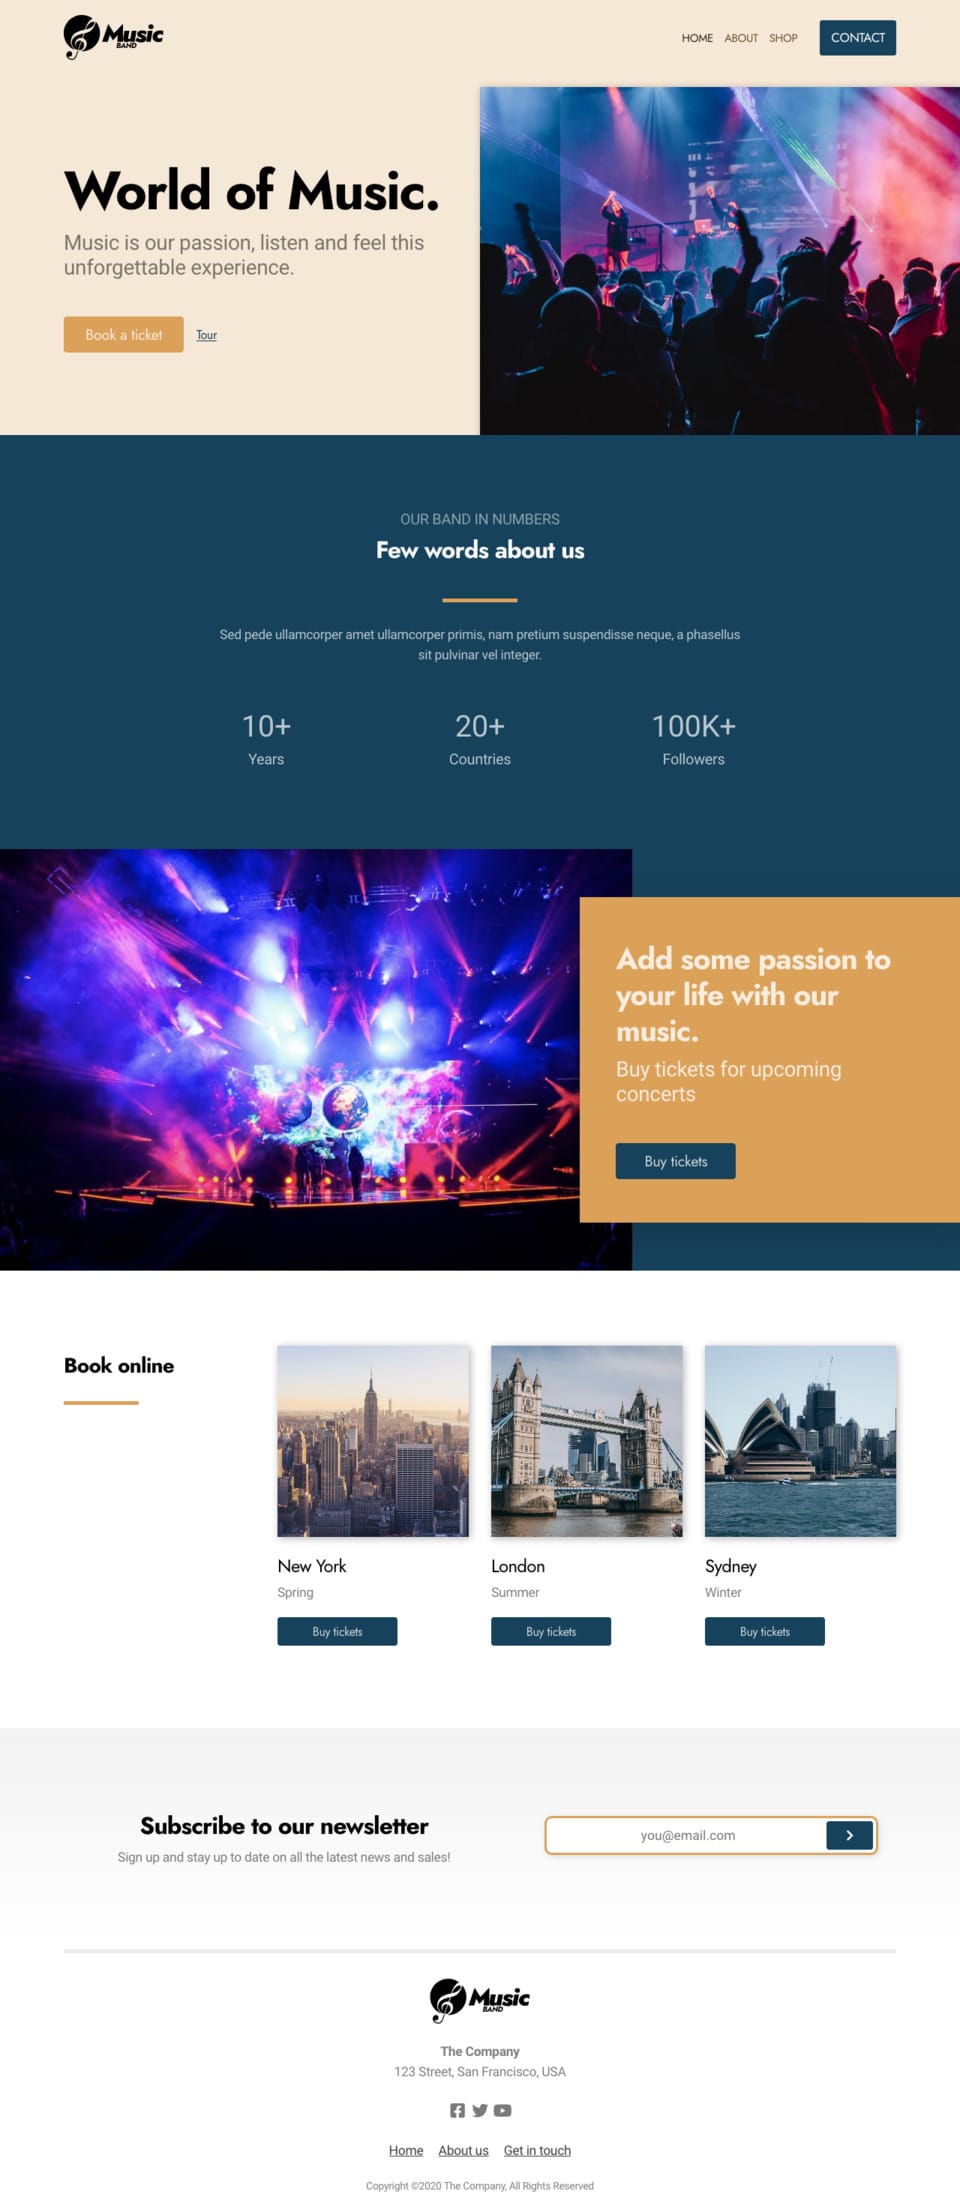 MusicBand Website Template - Ideal for music bands, concert organizers, entertainment venues, event planners, and any business needing a visually appealing website.